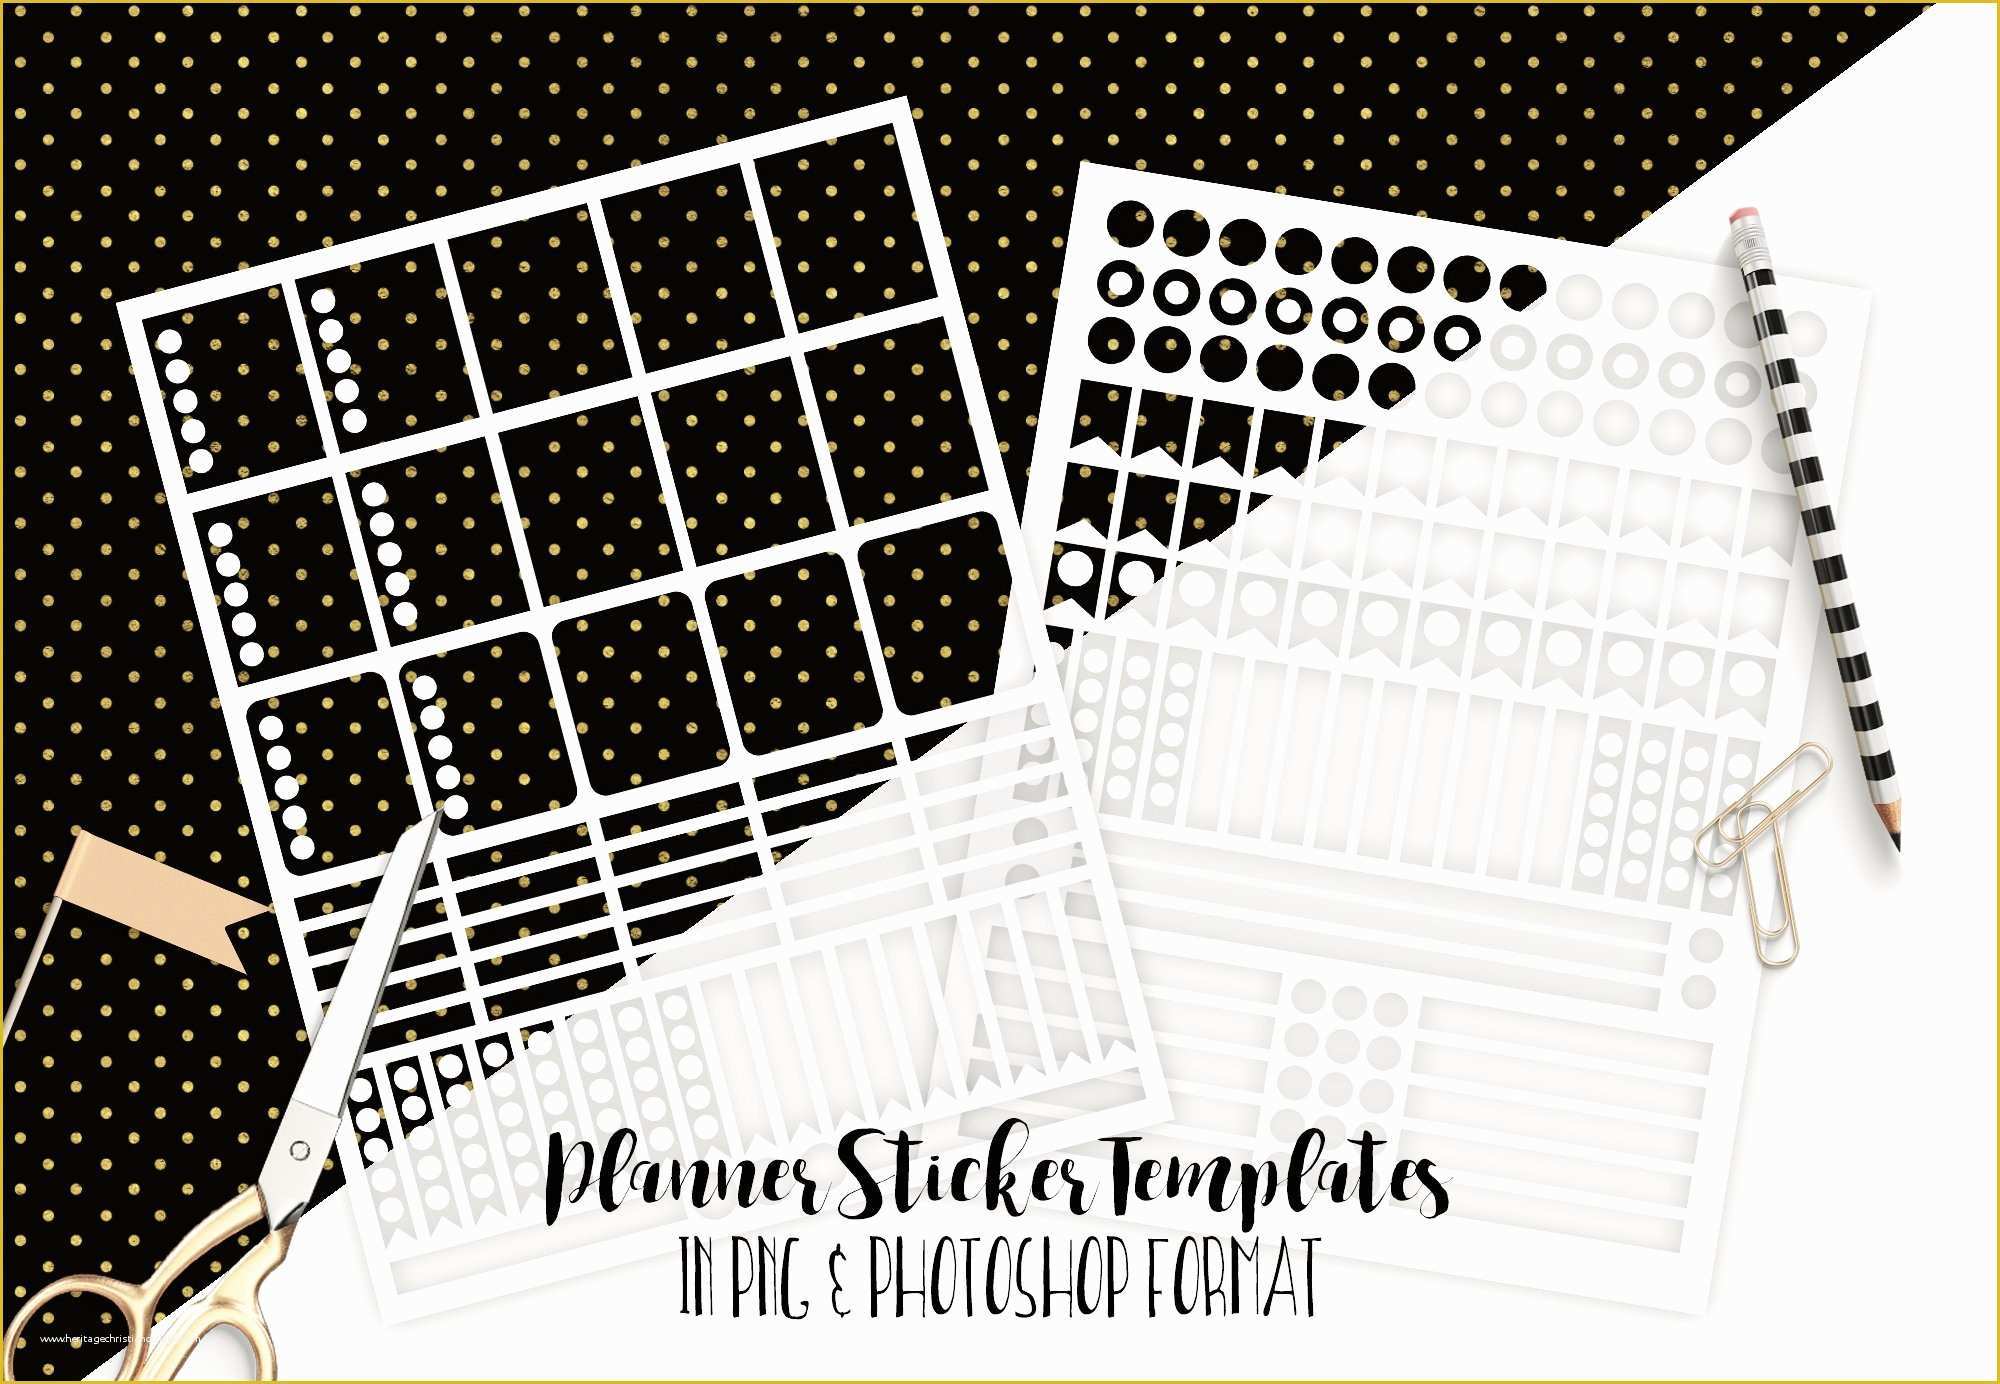 Free Planner Sticker Template Of Planner Sticker Templates Shop Stationery Templates